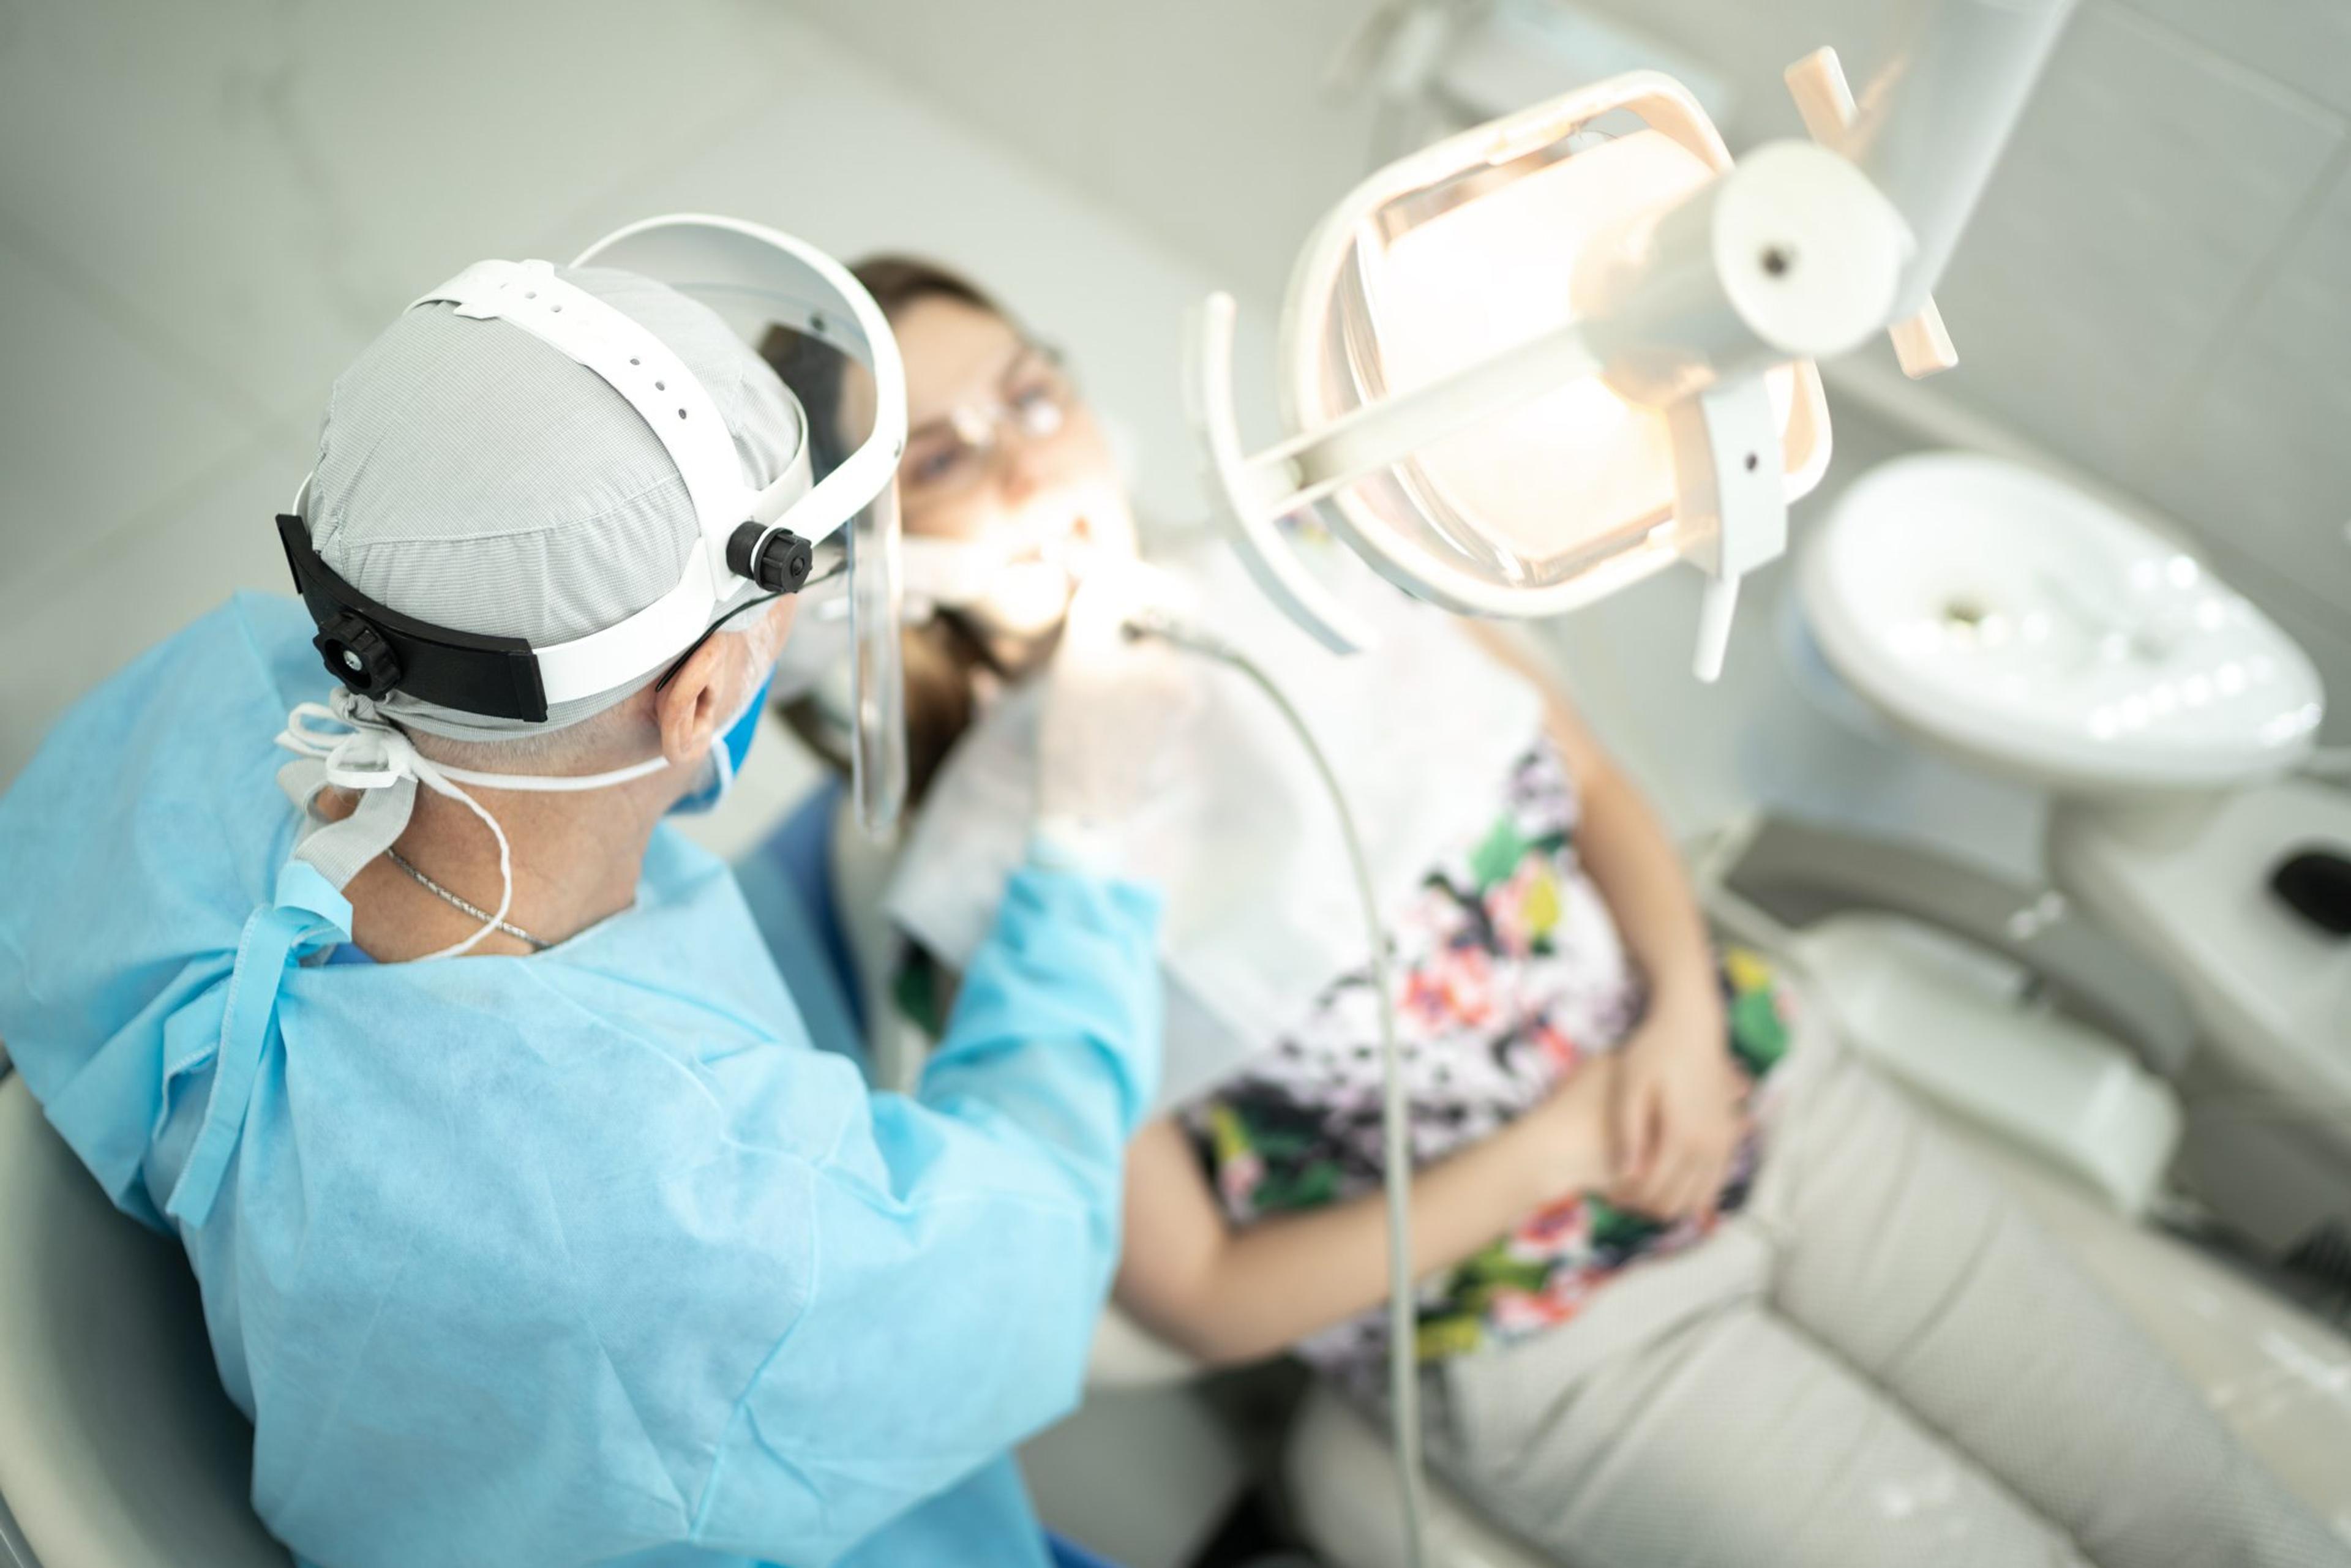 Dentist in PPE working with a patient